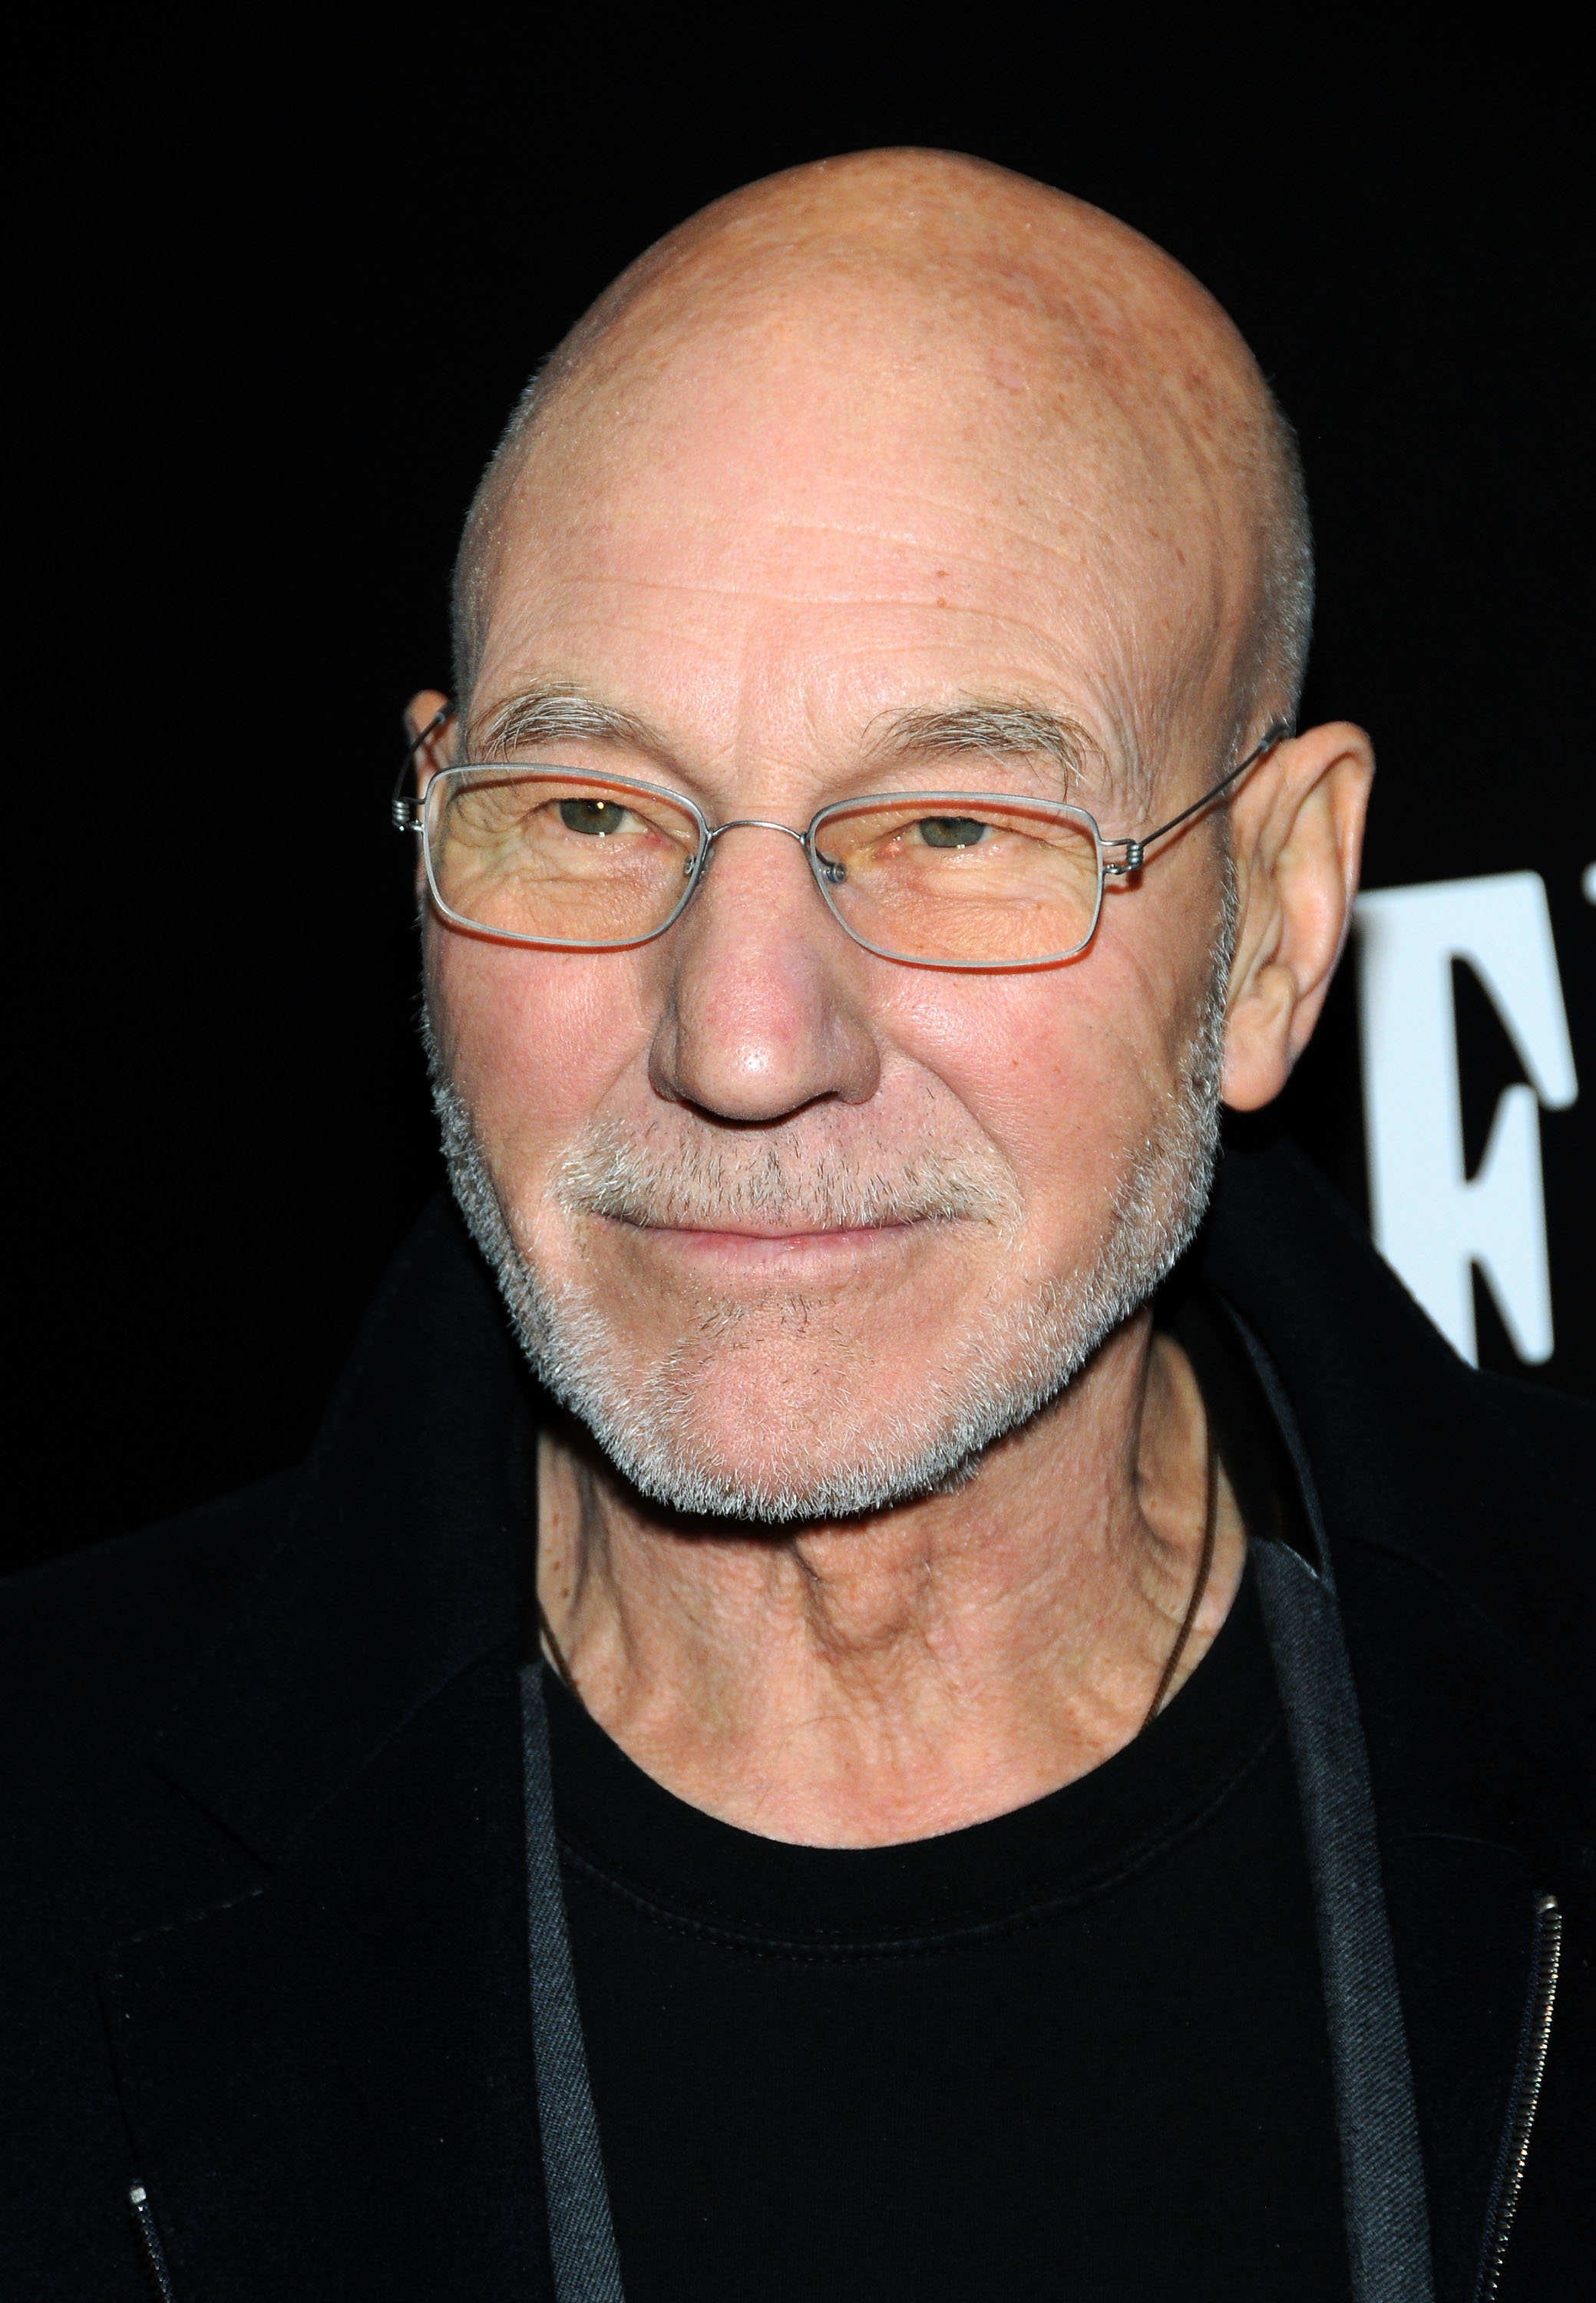 Patrick Stewart wearing glasses and a black jacket at an event